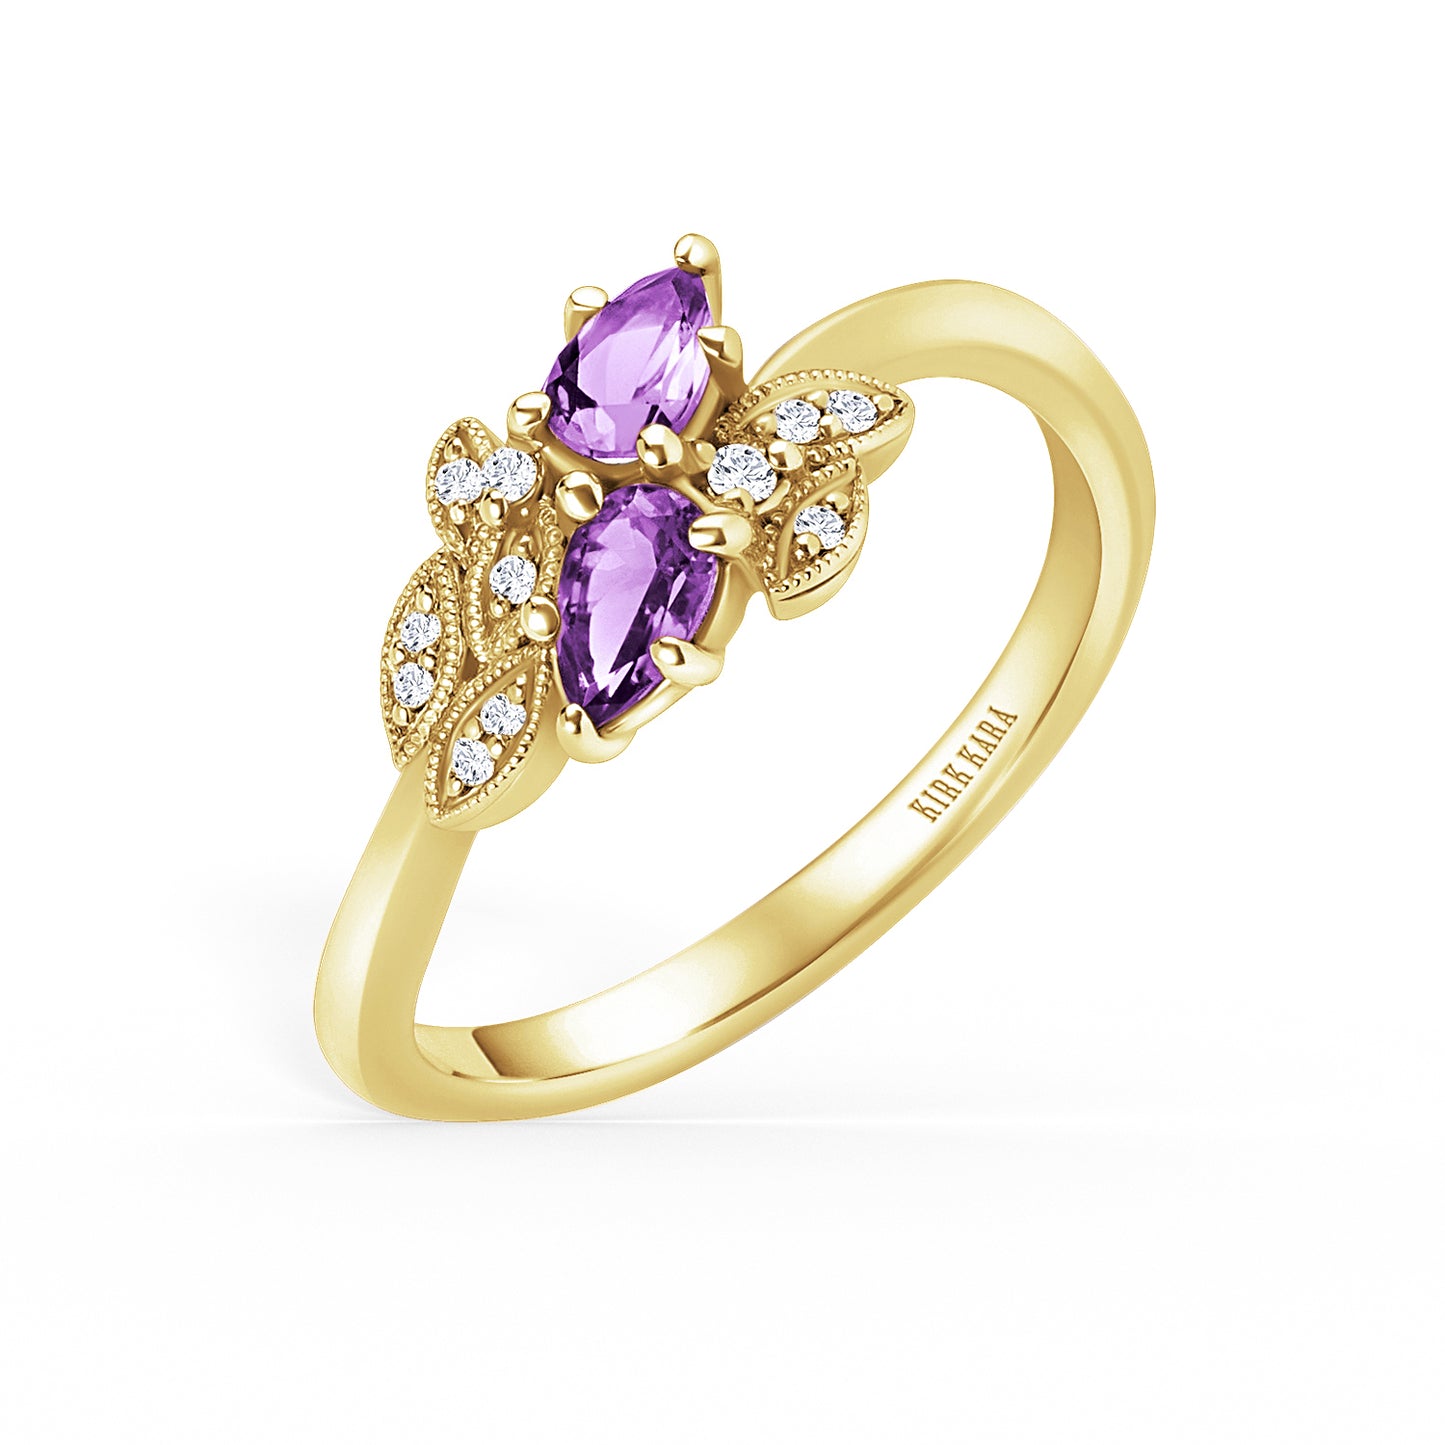 Floral Diamond Amethyst Bypass Fashion Ring